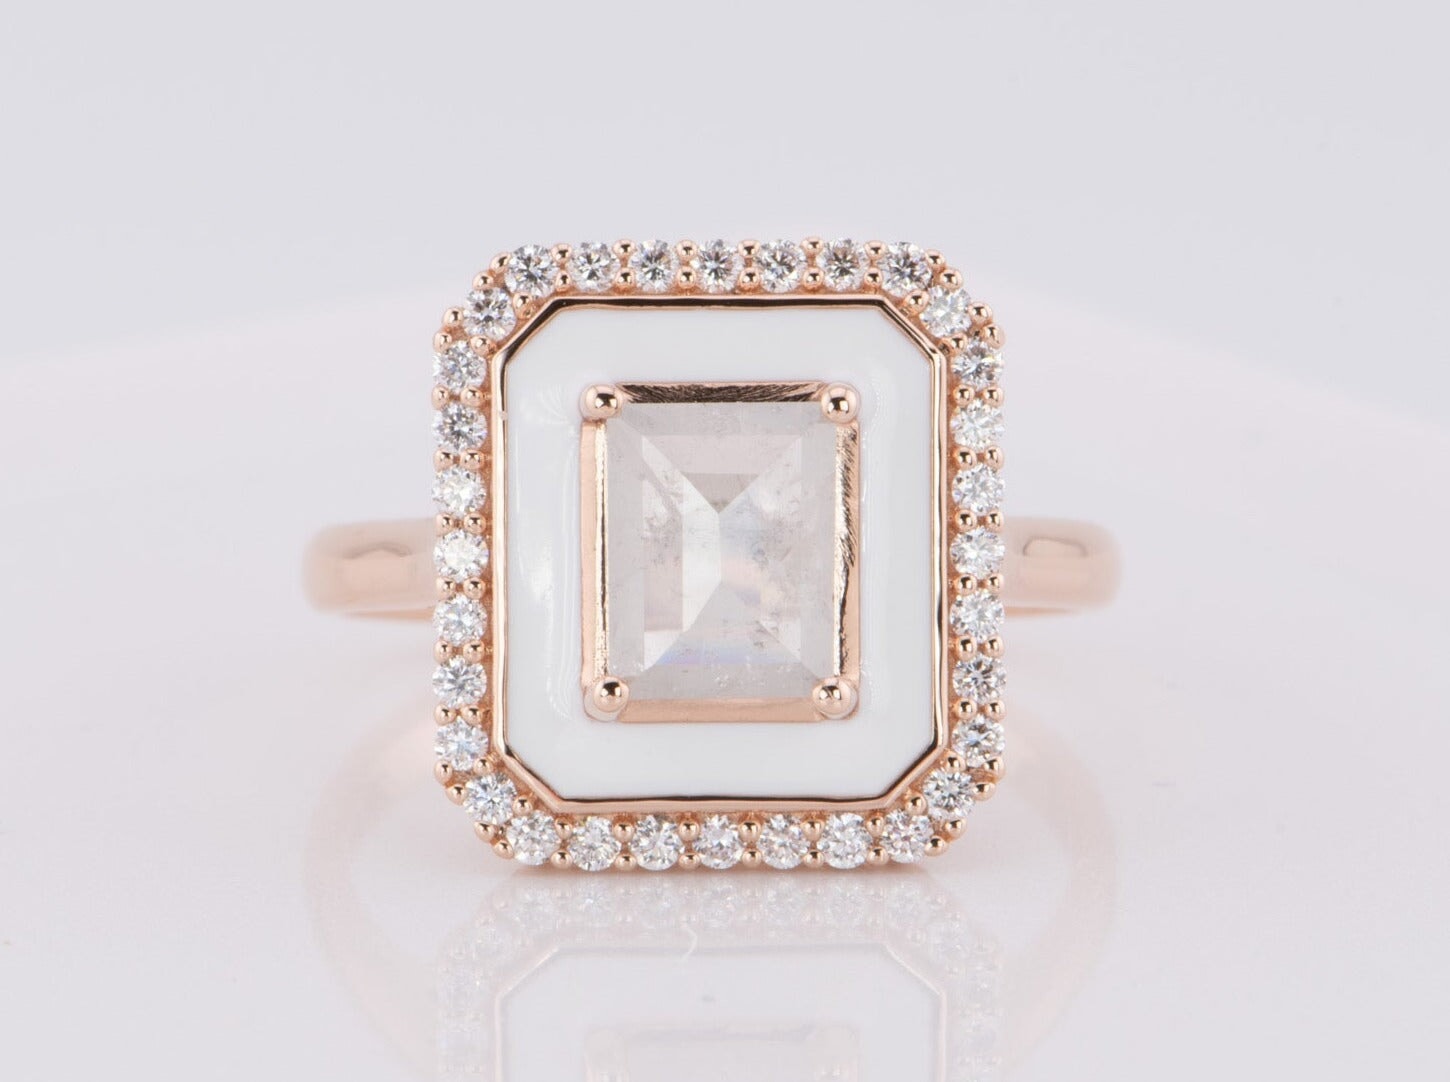 Icy Gray Diamond 1.01ct with White Enamel Halo and Outer Diamonds Engagement Ring 14K Rose Gold R6596 Aurora Designer